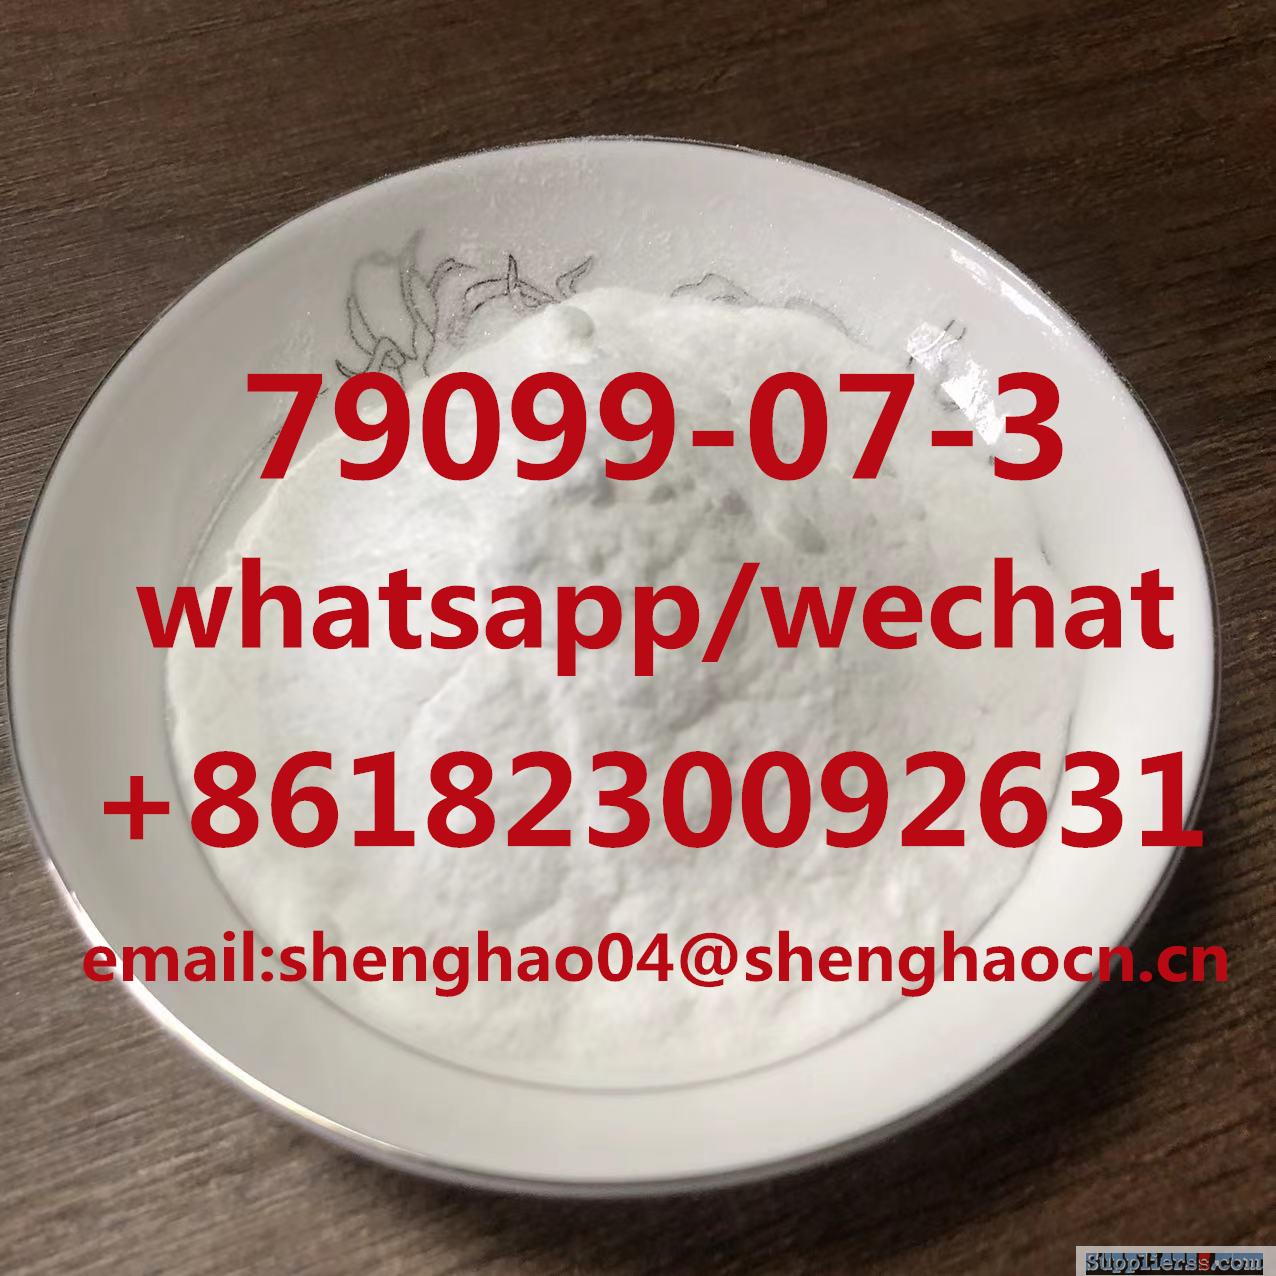 good quality 79099-07-3 fast delivery